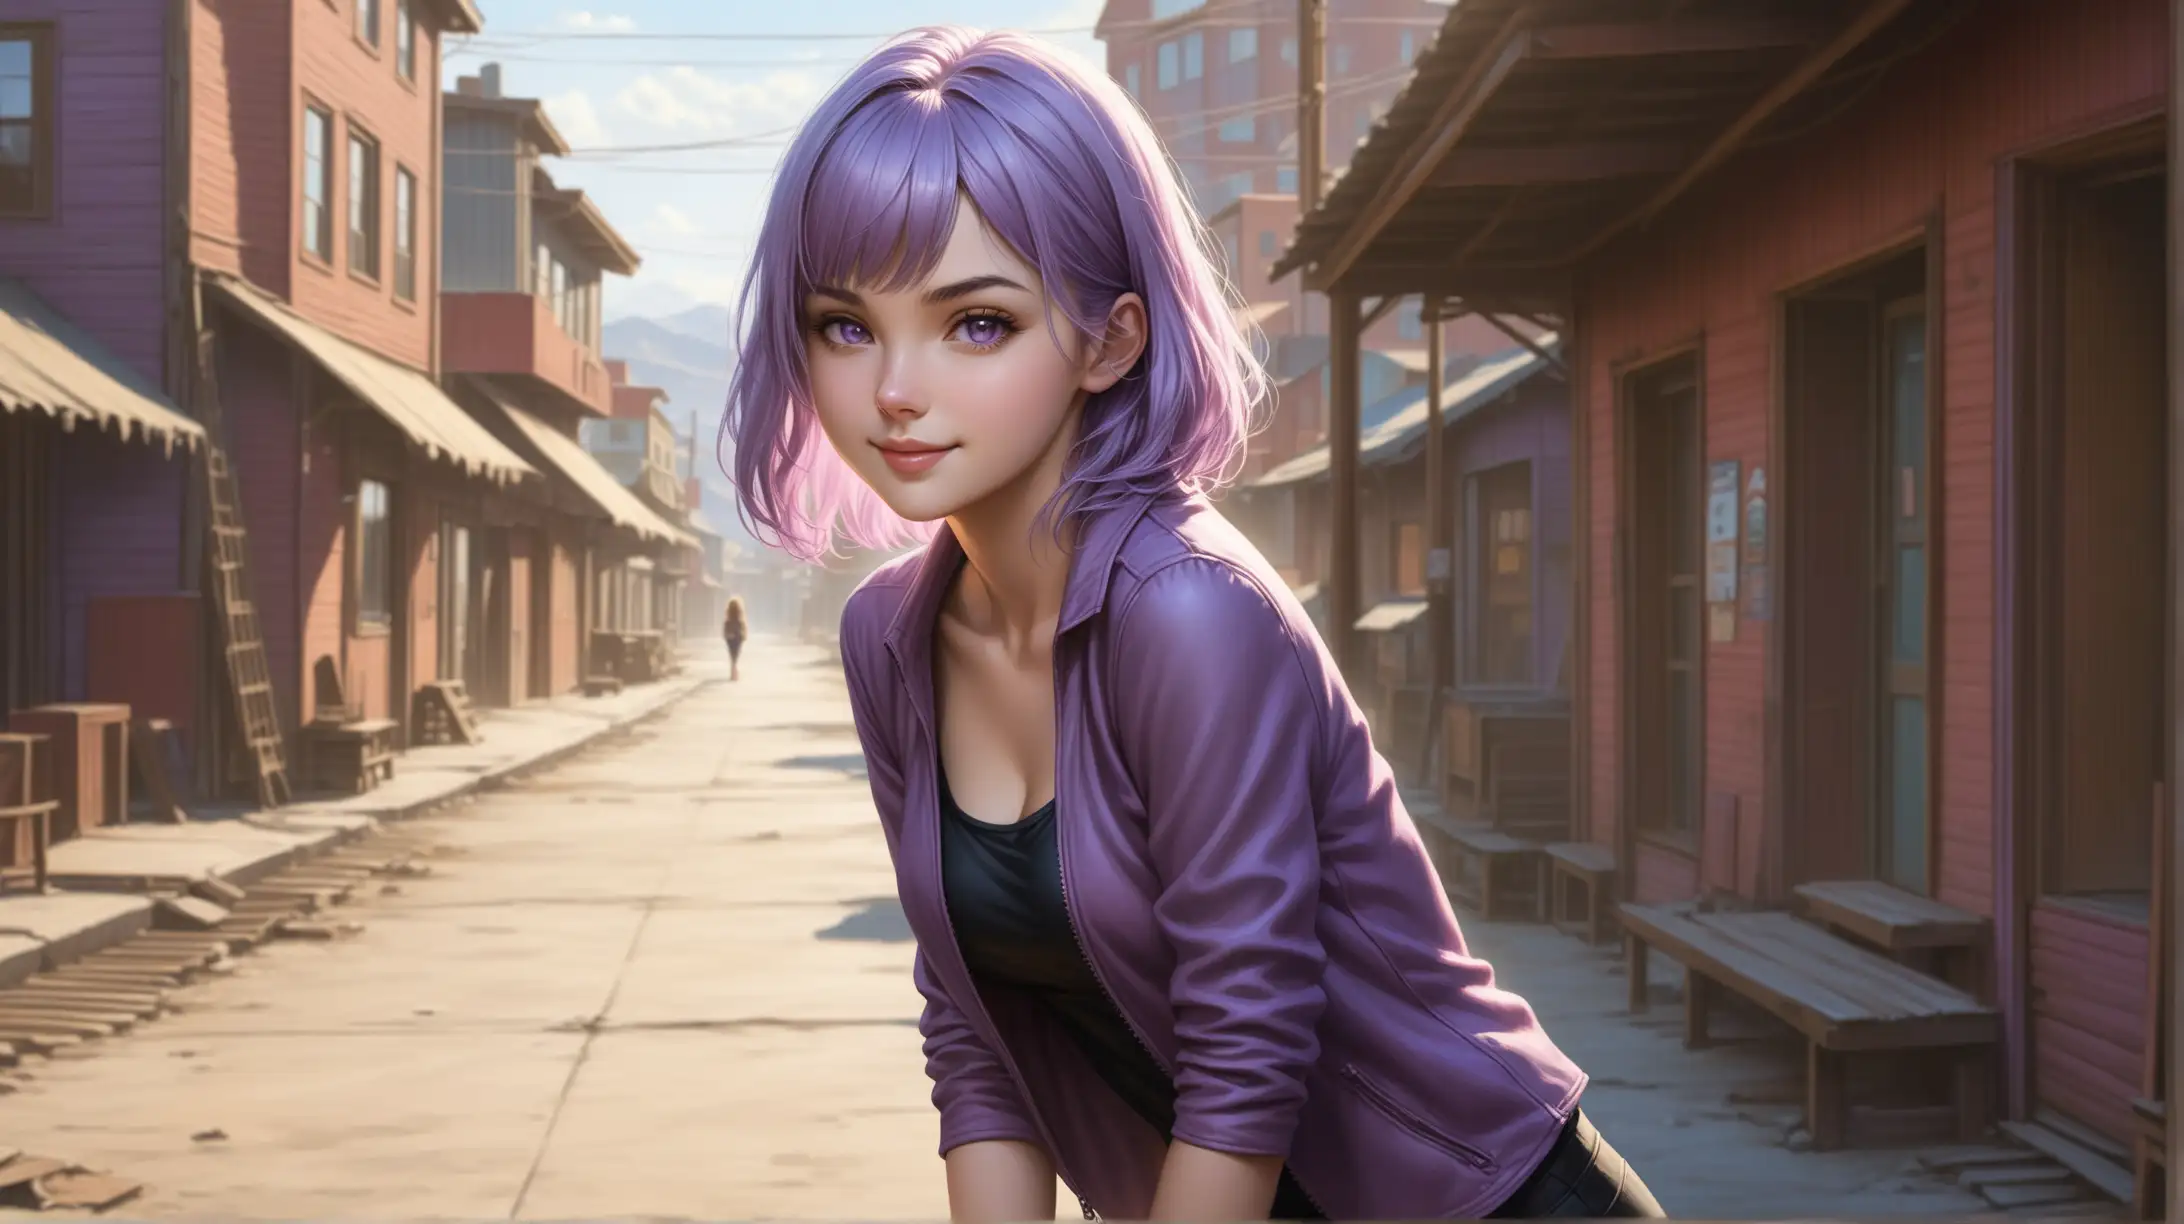 Seductive Woman with Light Purple Hair in FalloutInspired Outfit Outdoors